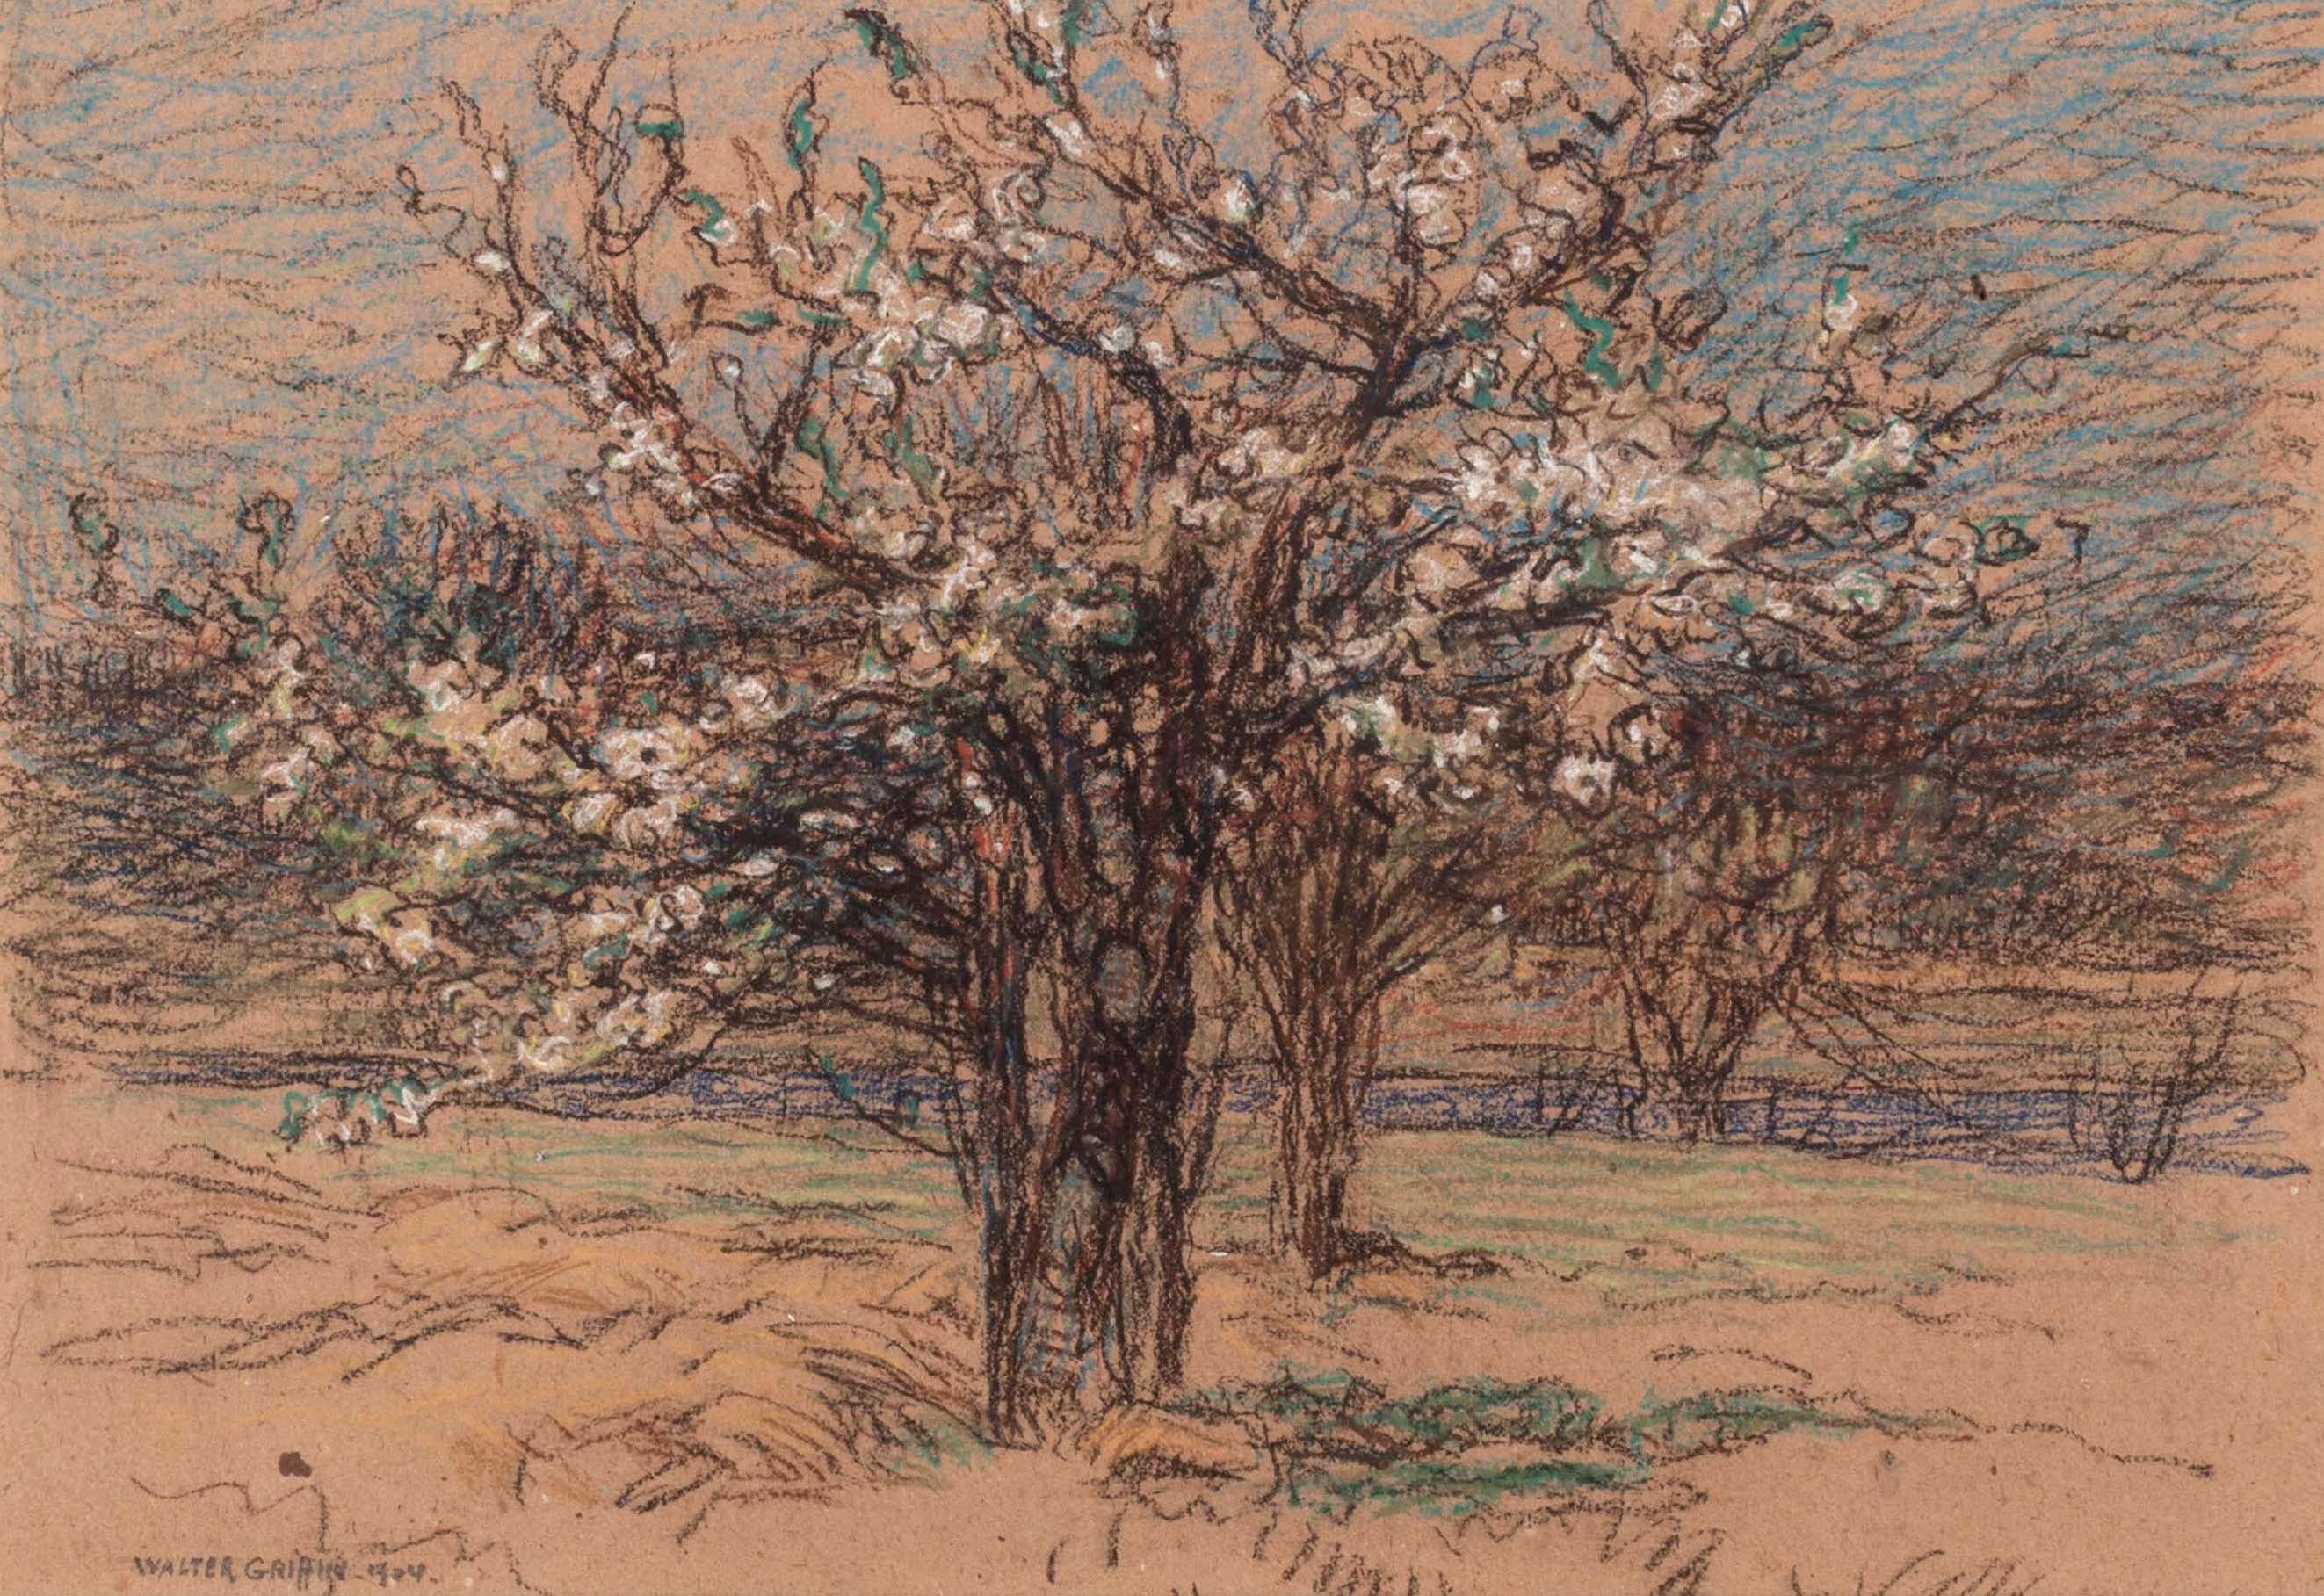 Orchard in Blossom, Spring landscape, by American artist Walter Griffin

Walter Griffin (1876-1937)
Orchard in Blossom, 1904
Pastel on paper
11 x 14 inches
Signed lower left